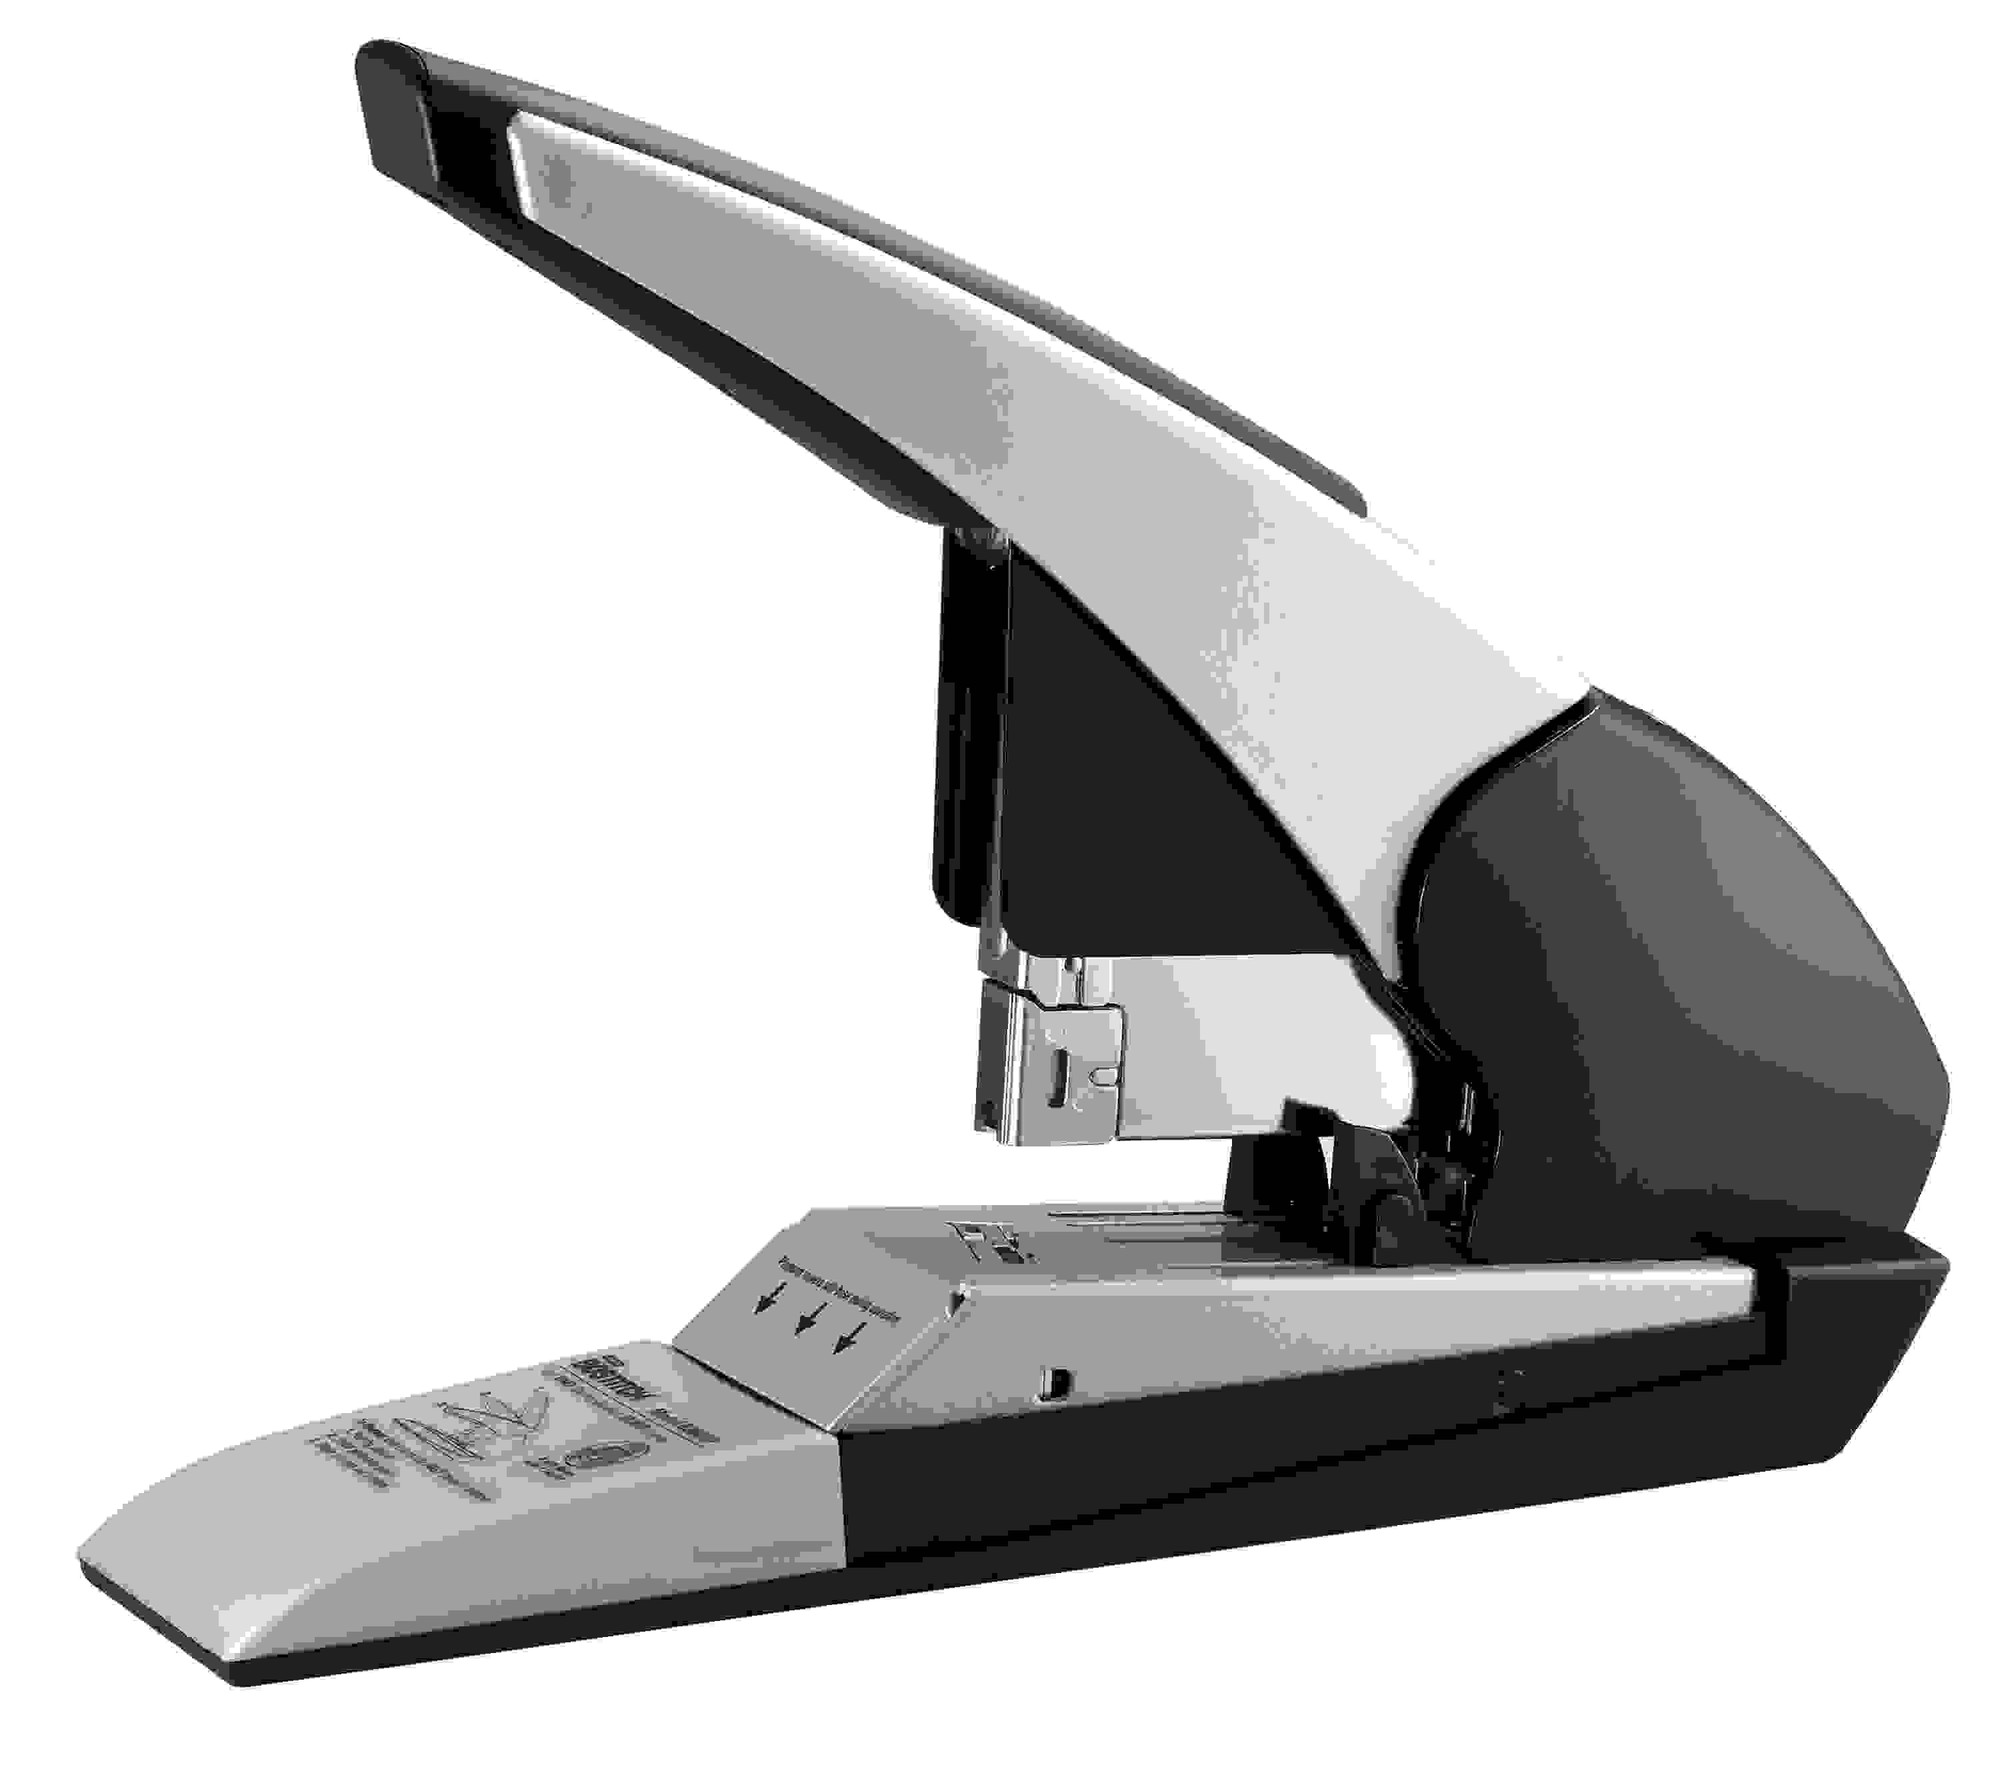 Bostitch Auto180 Xtreme Duty Automatic Stapler - 180 Sheets Capacity - Silver, Black